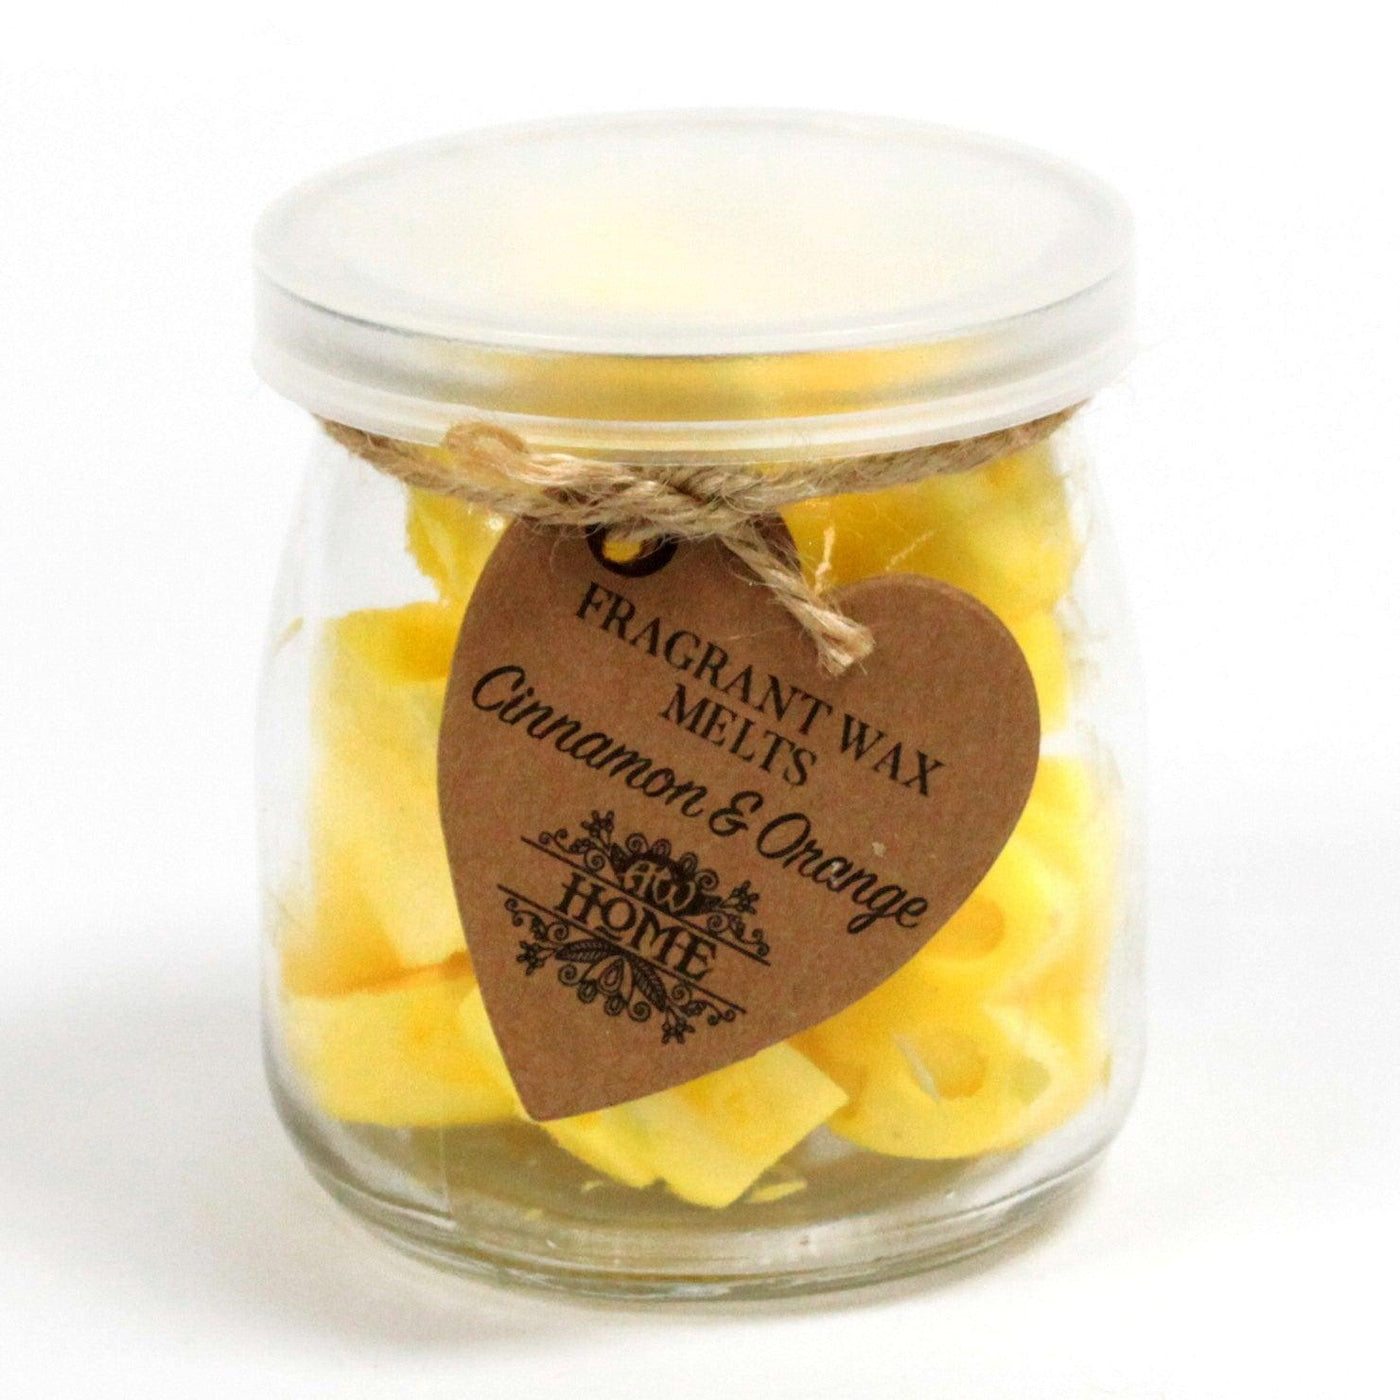 Natural Soy Fragrance Oil Heart Wax Melts - Cinnamon And Orange.